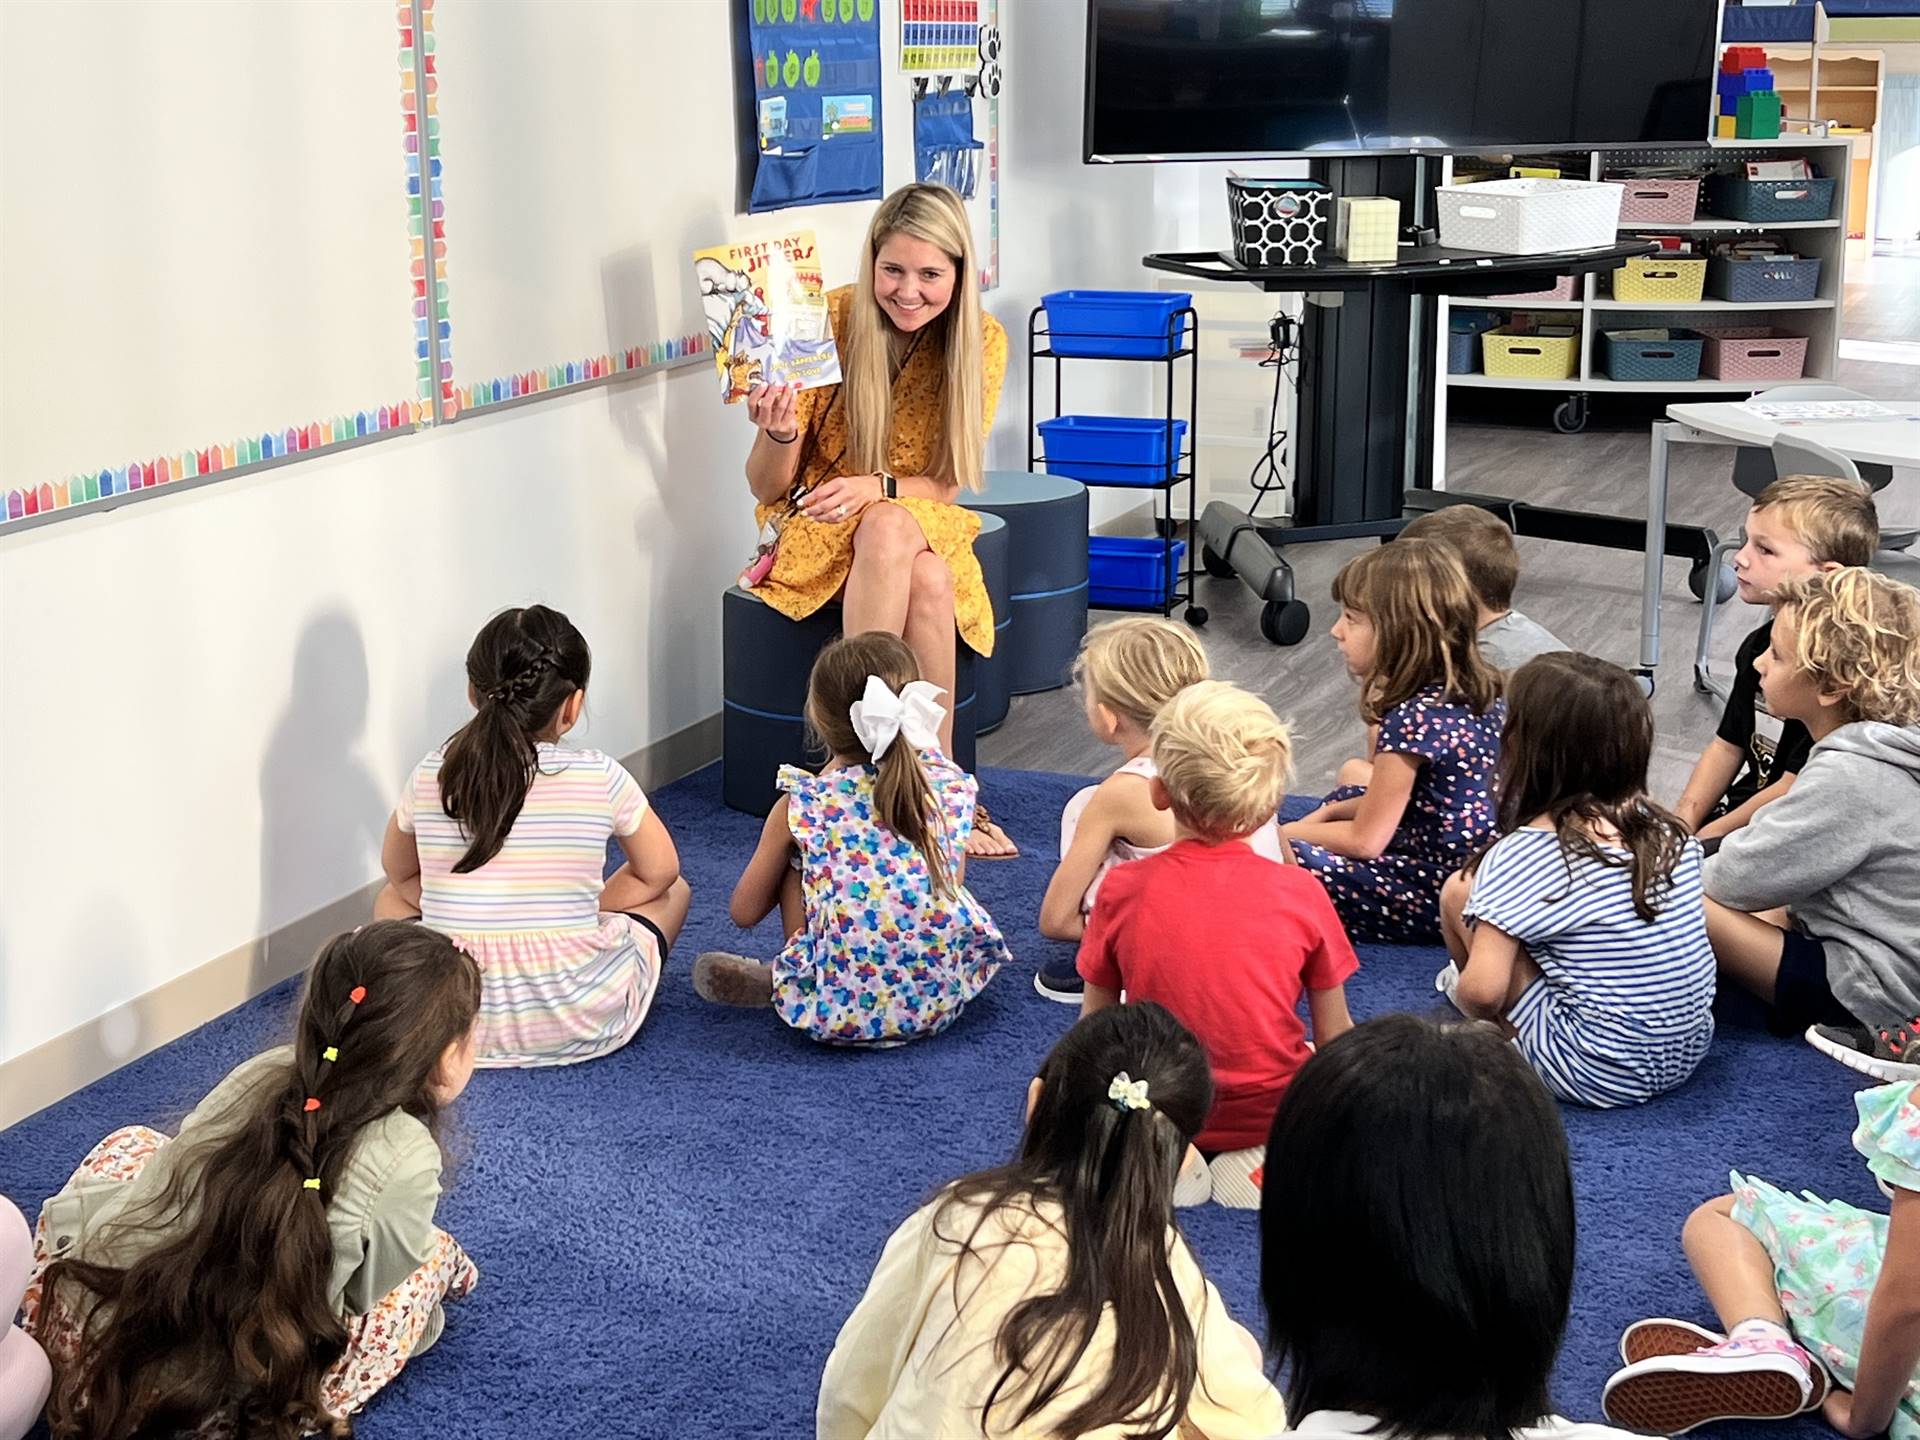 A kindergarten teacher reading to her students a book called "First Day Jitters" on the first day of